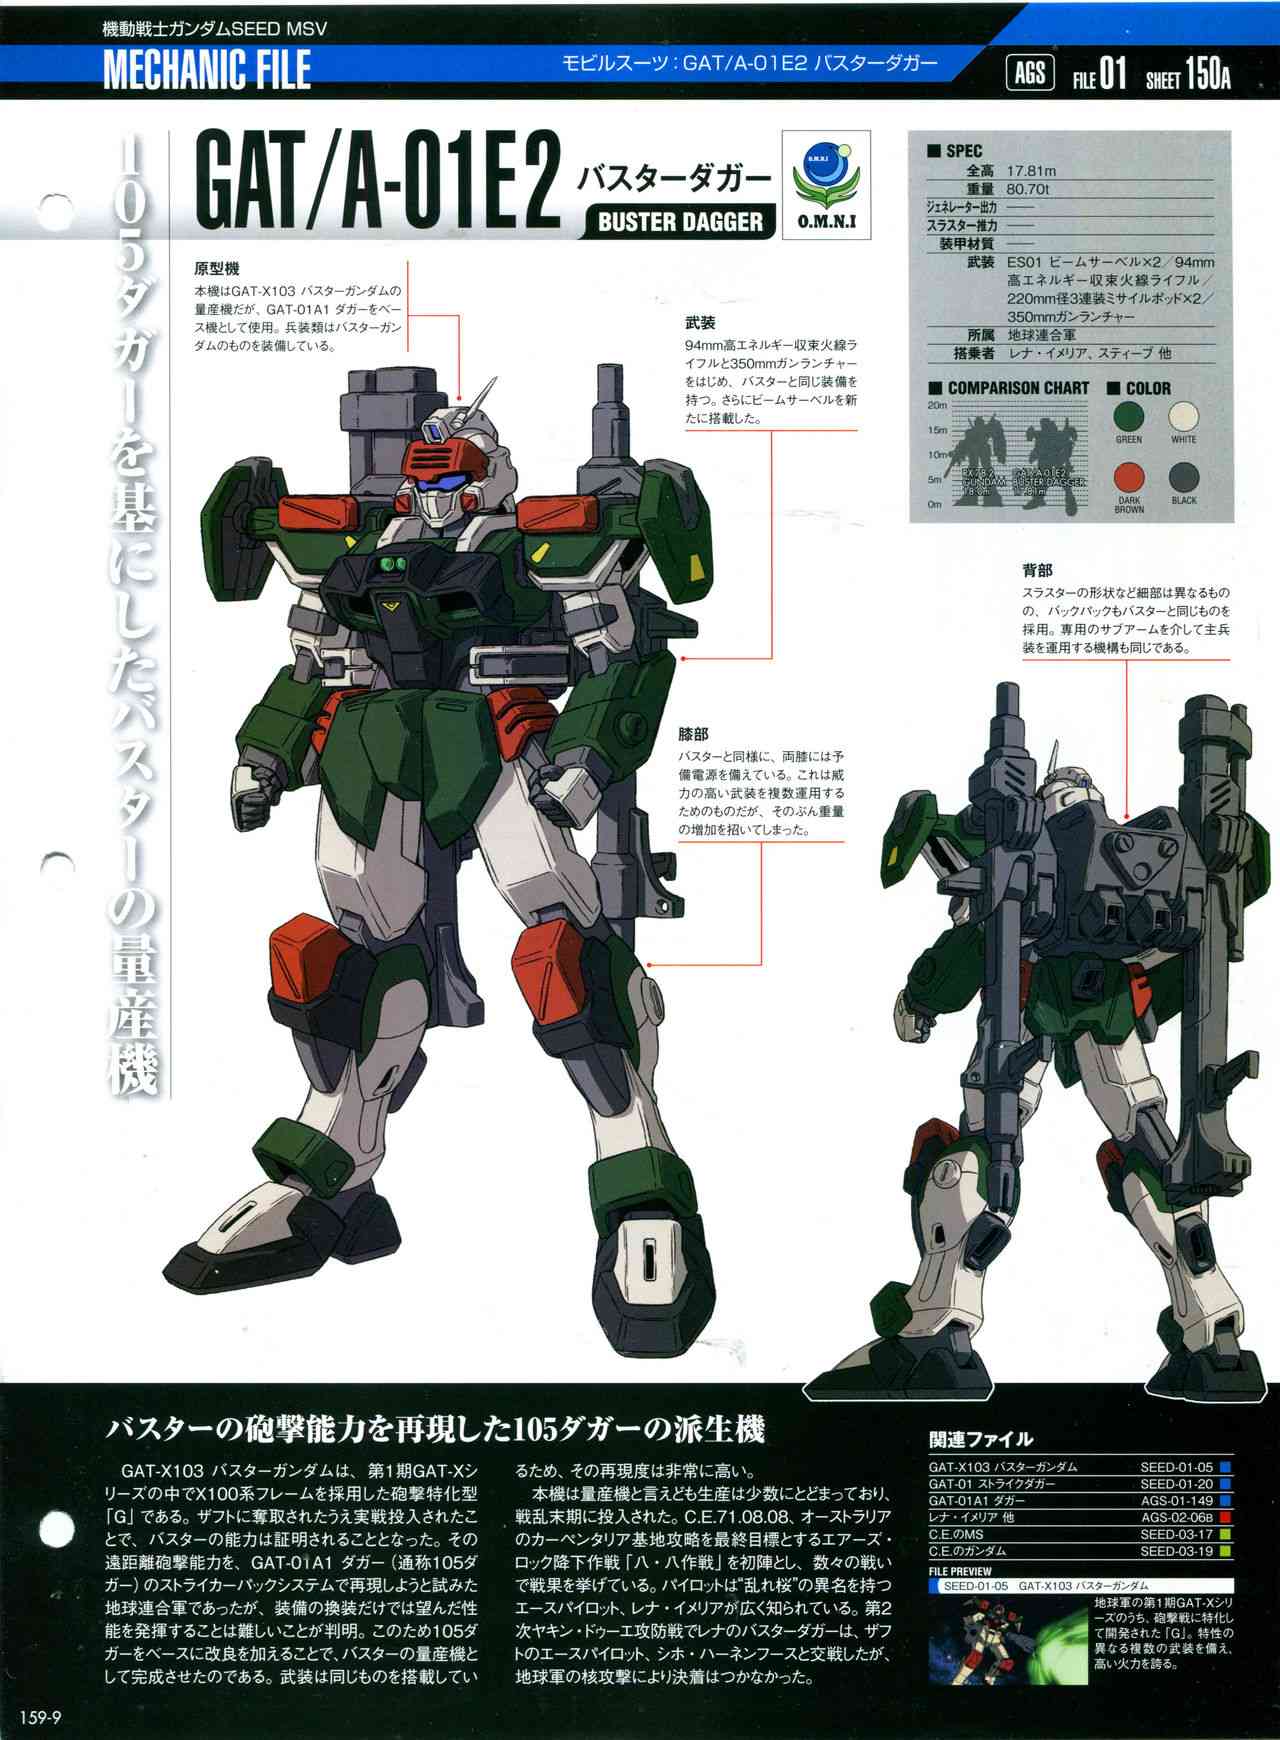 The Official Gundam Perfect File  - 159話 - 1